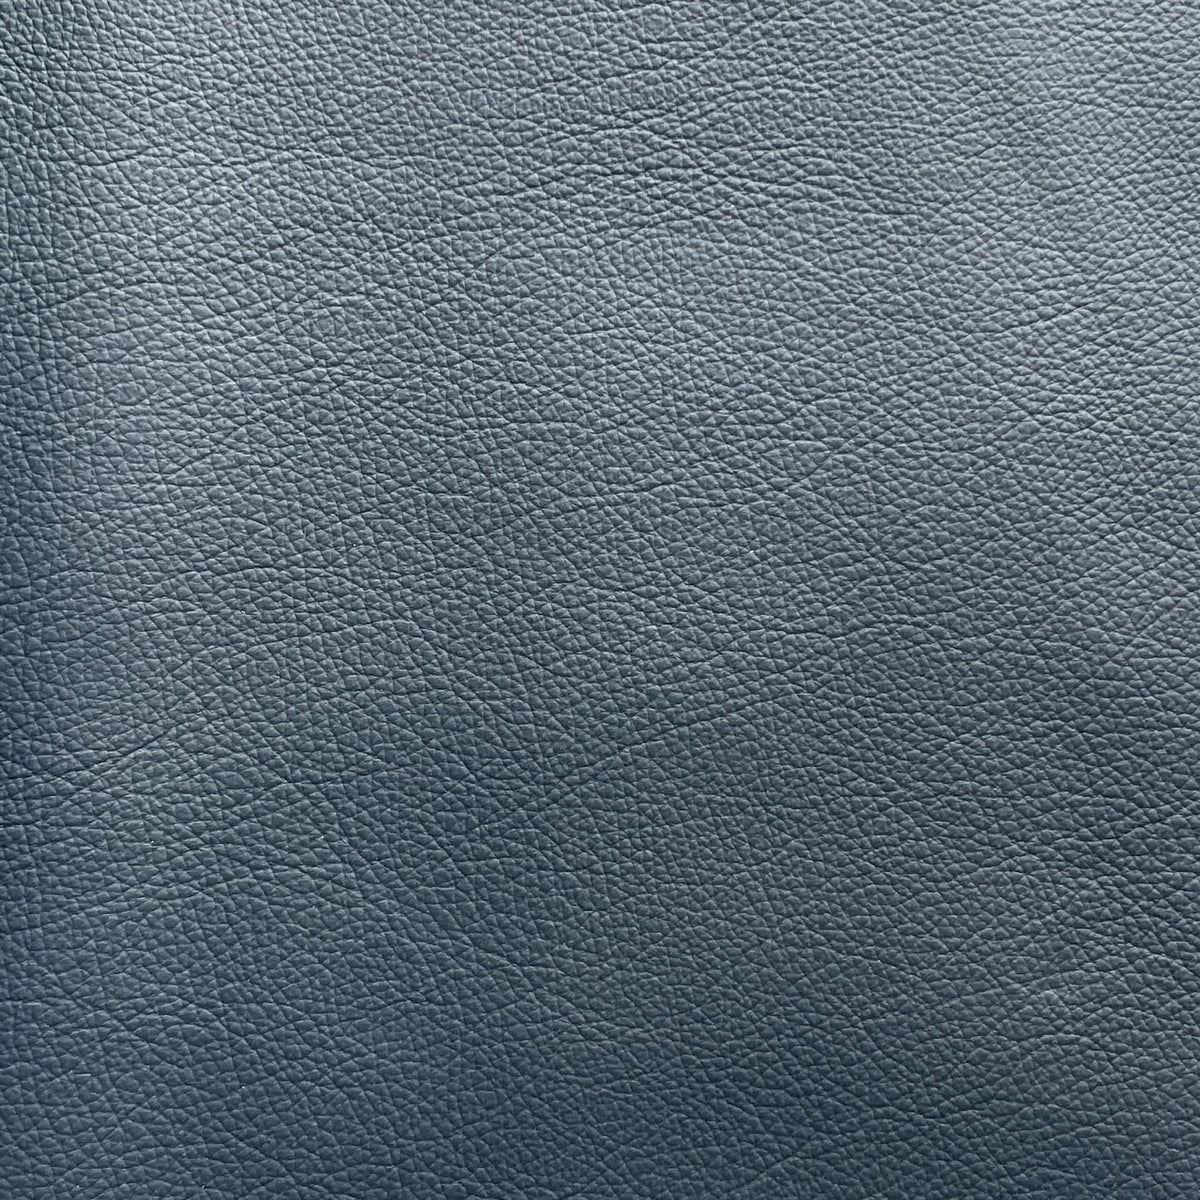 Upholstery Cow Hide #19 | Navy | 1.0/1.2mm | 50 sq.ft | $420 ea.